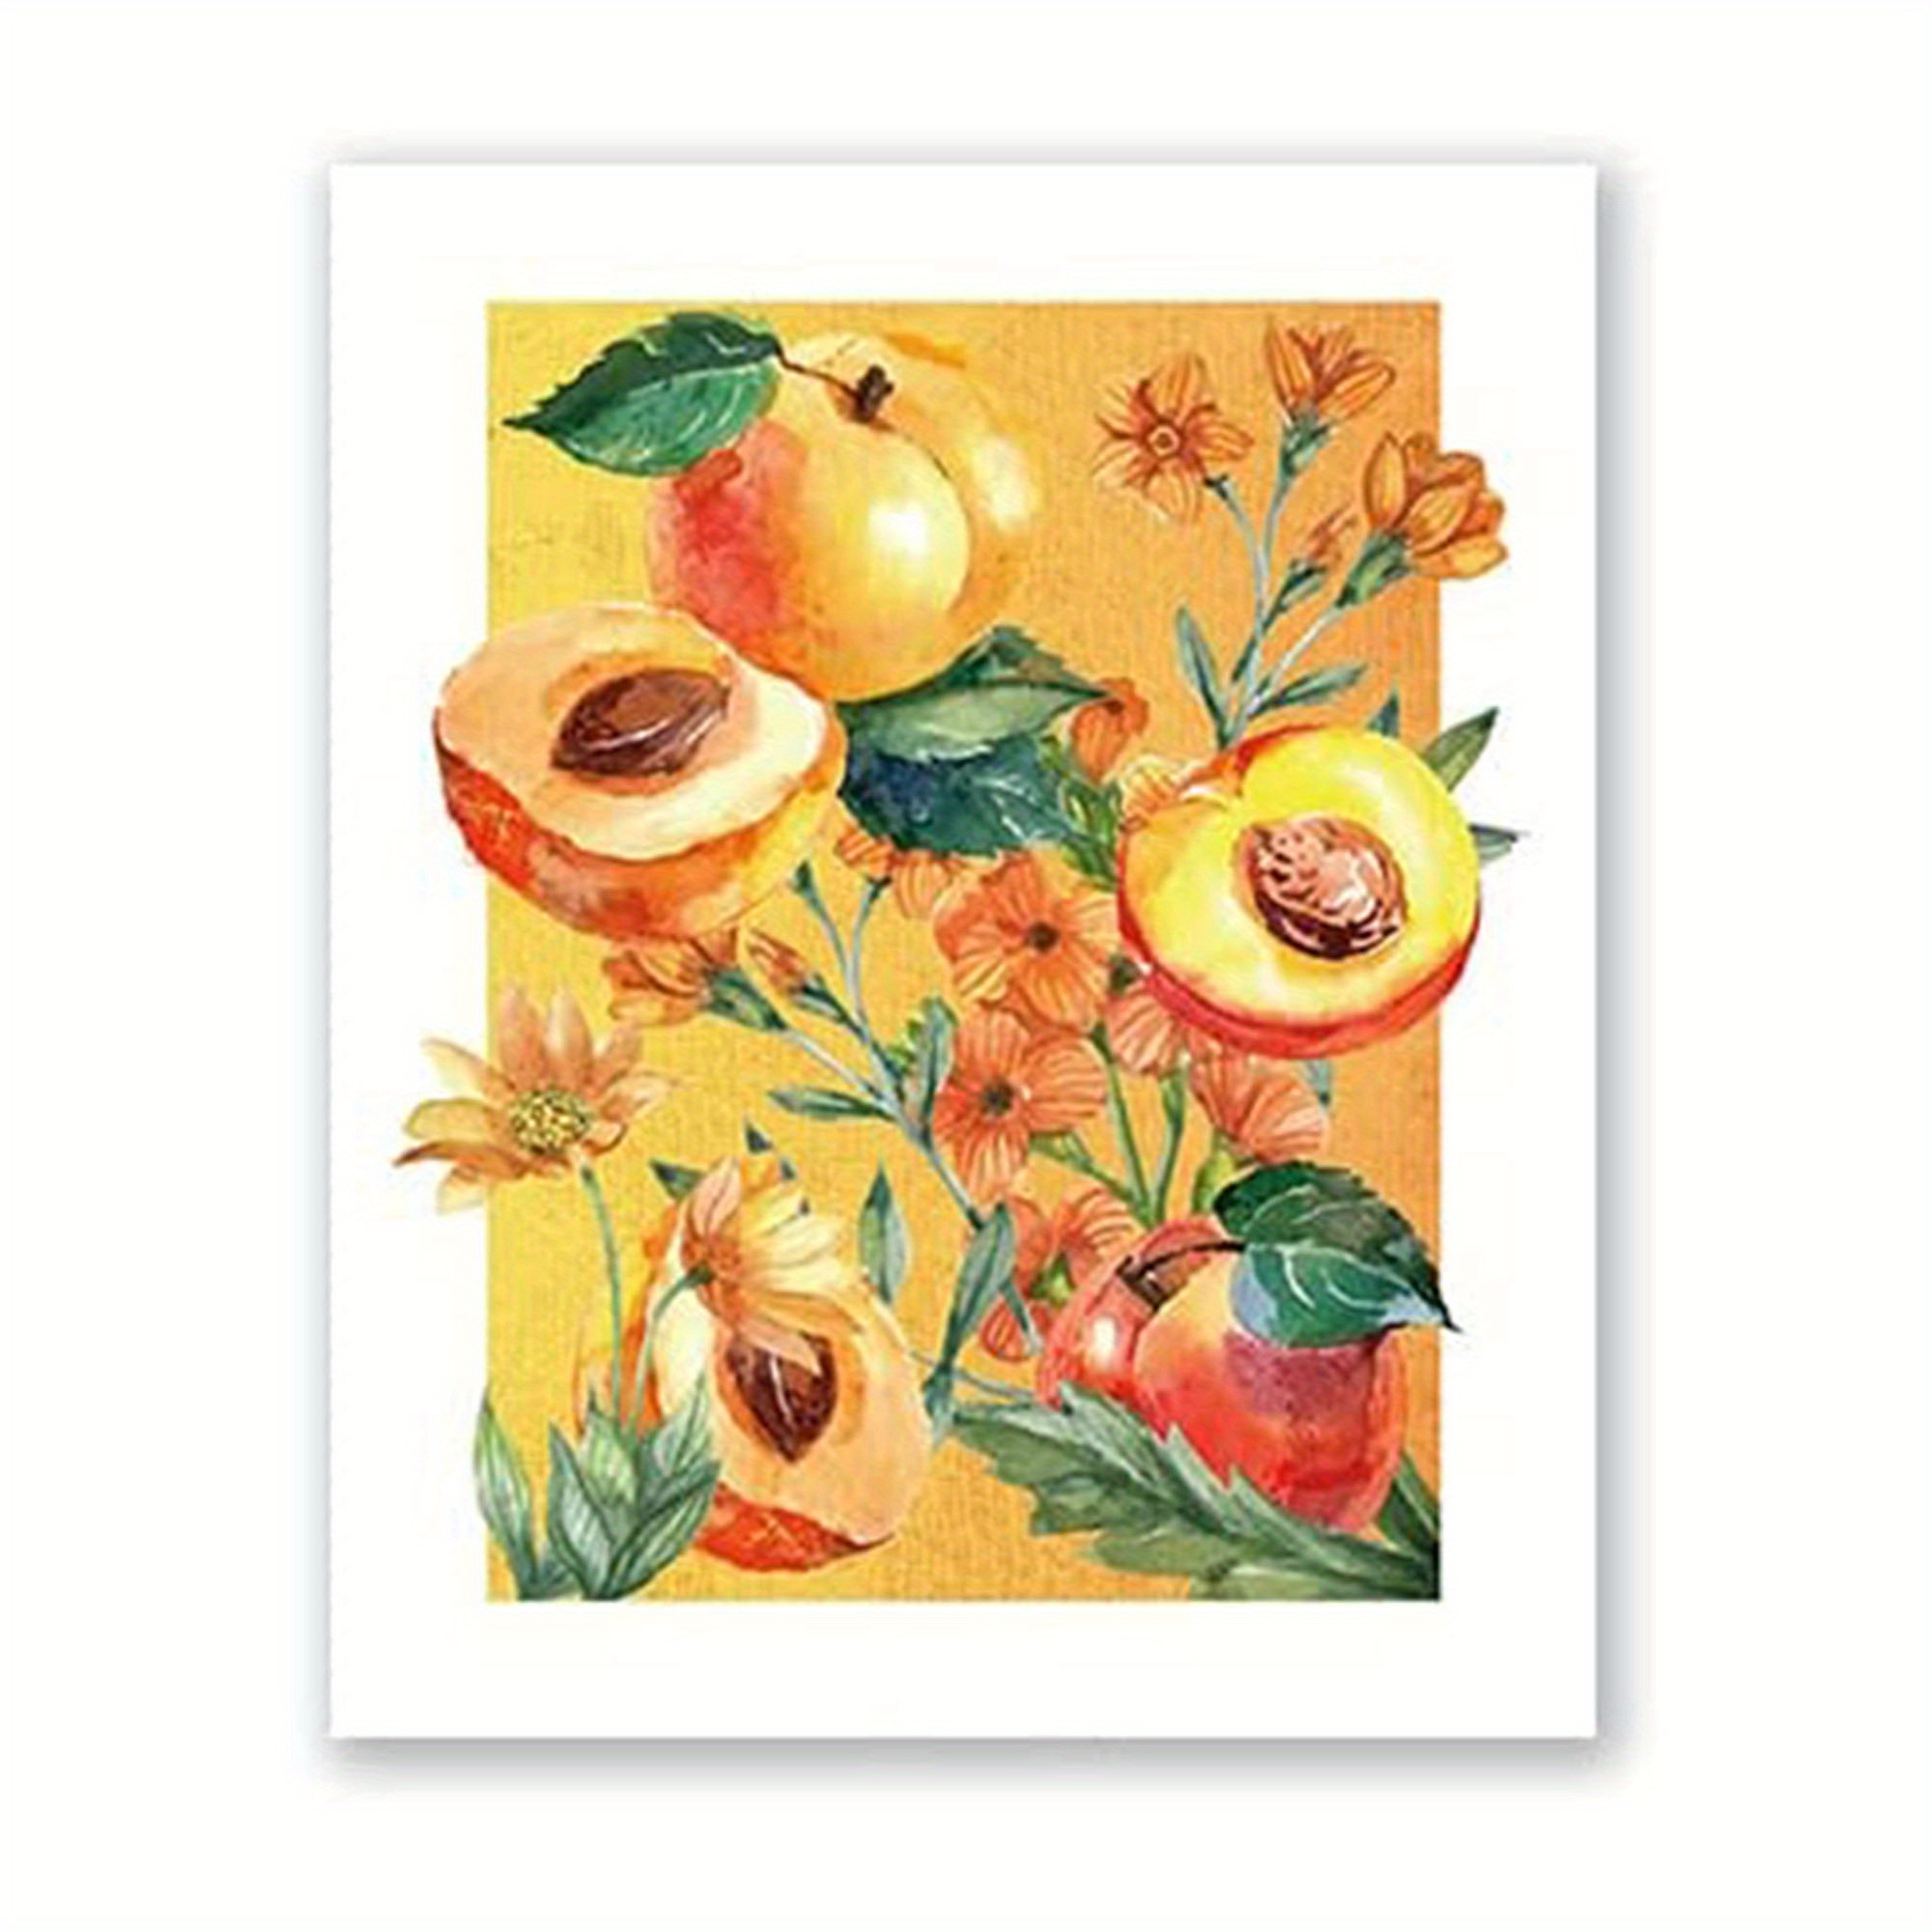 Brighten Up Your Home Decor with a Colorful Fruit Wall Art Print - Unframed Peaches Canvas Print!